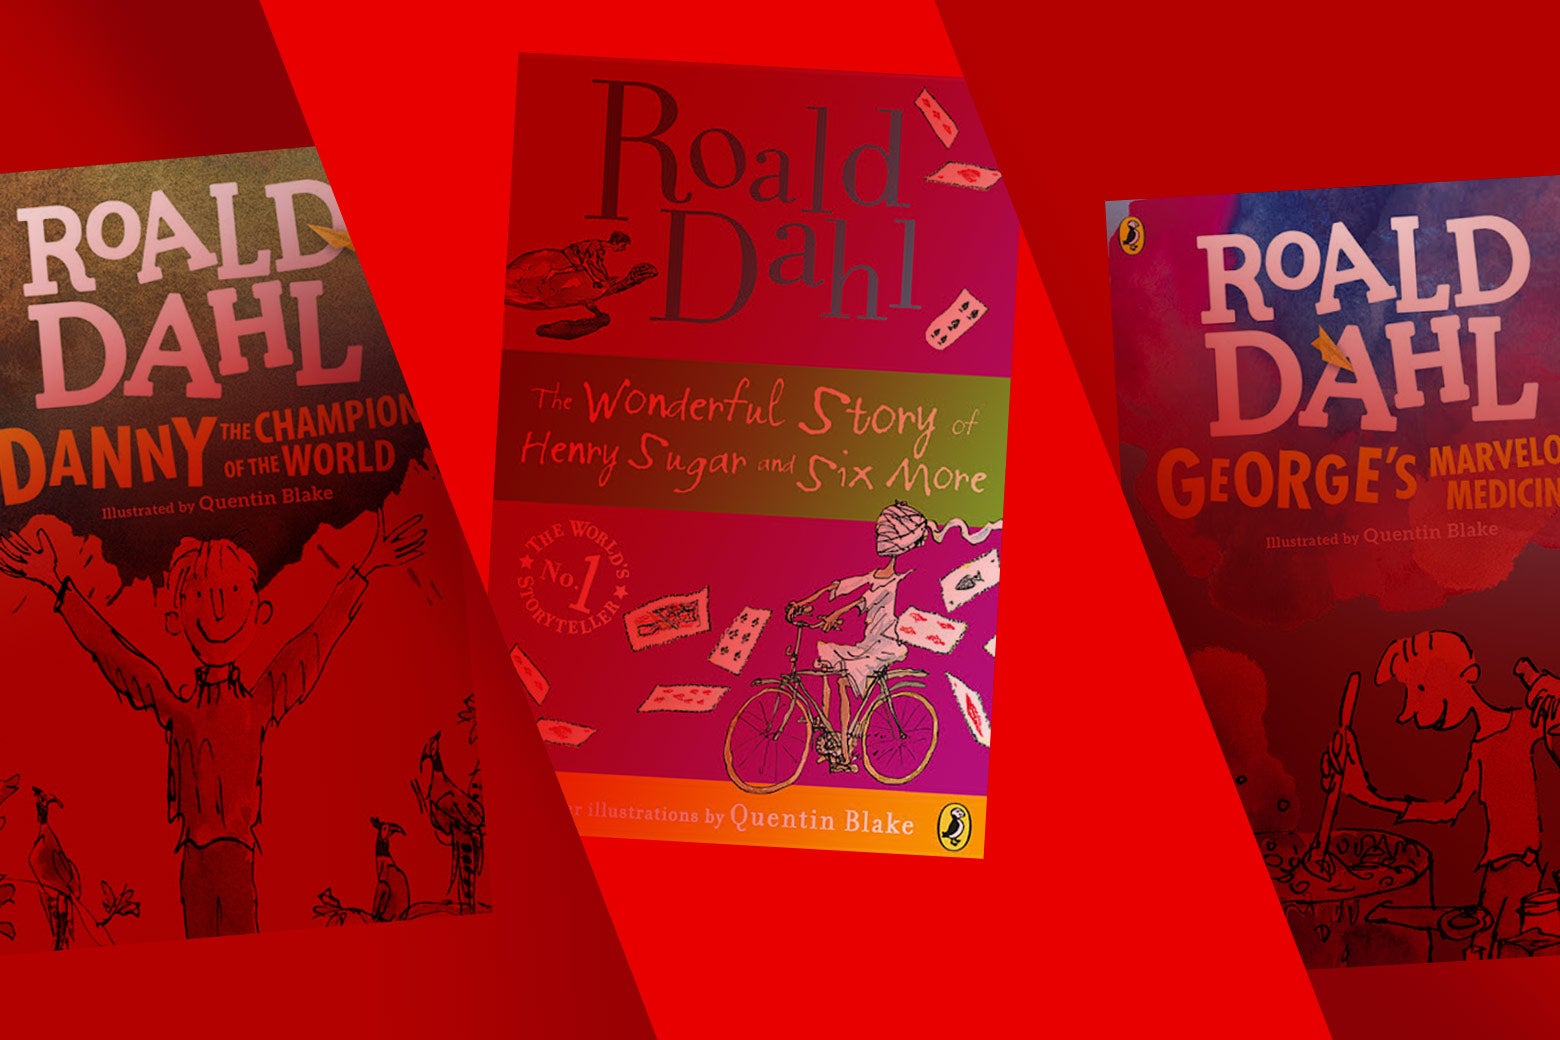 The book covers of Danny the Champion of the World, The Wonderful Story of Henry Sugar and Six More, and George's Marvelous Medicine. They are bathed in the red color of the Netflix logo.